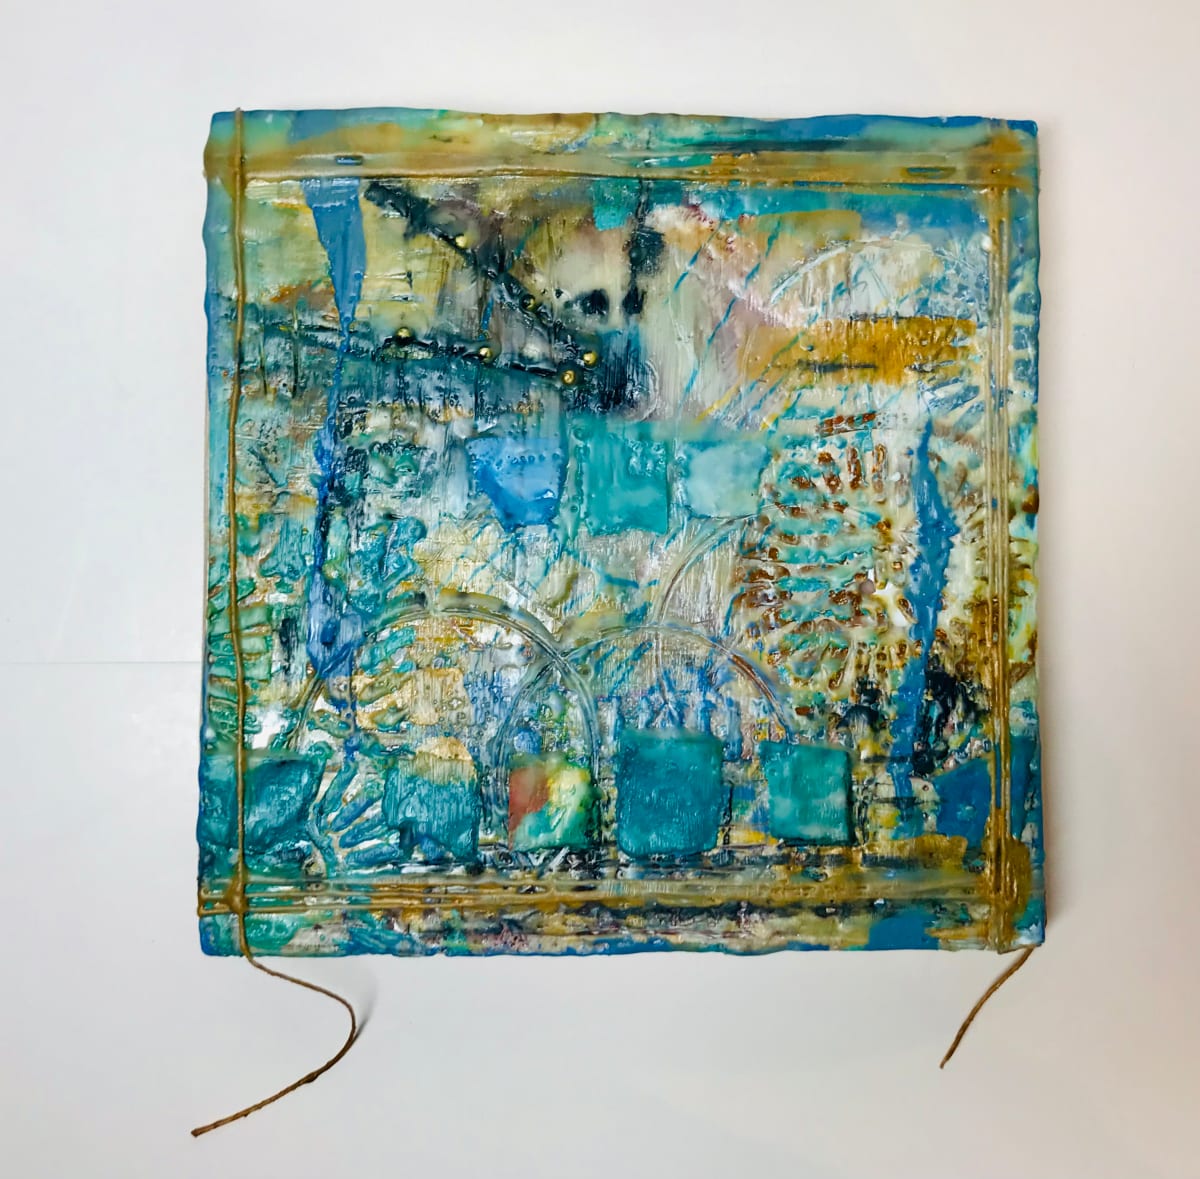 Resilience #2 by Suzy Johnson  Image: 8x8x1.5 Encaustic Collage